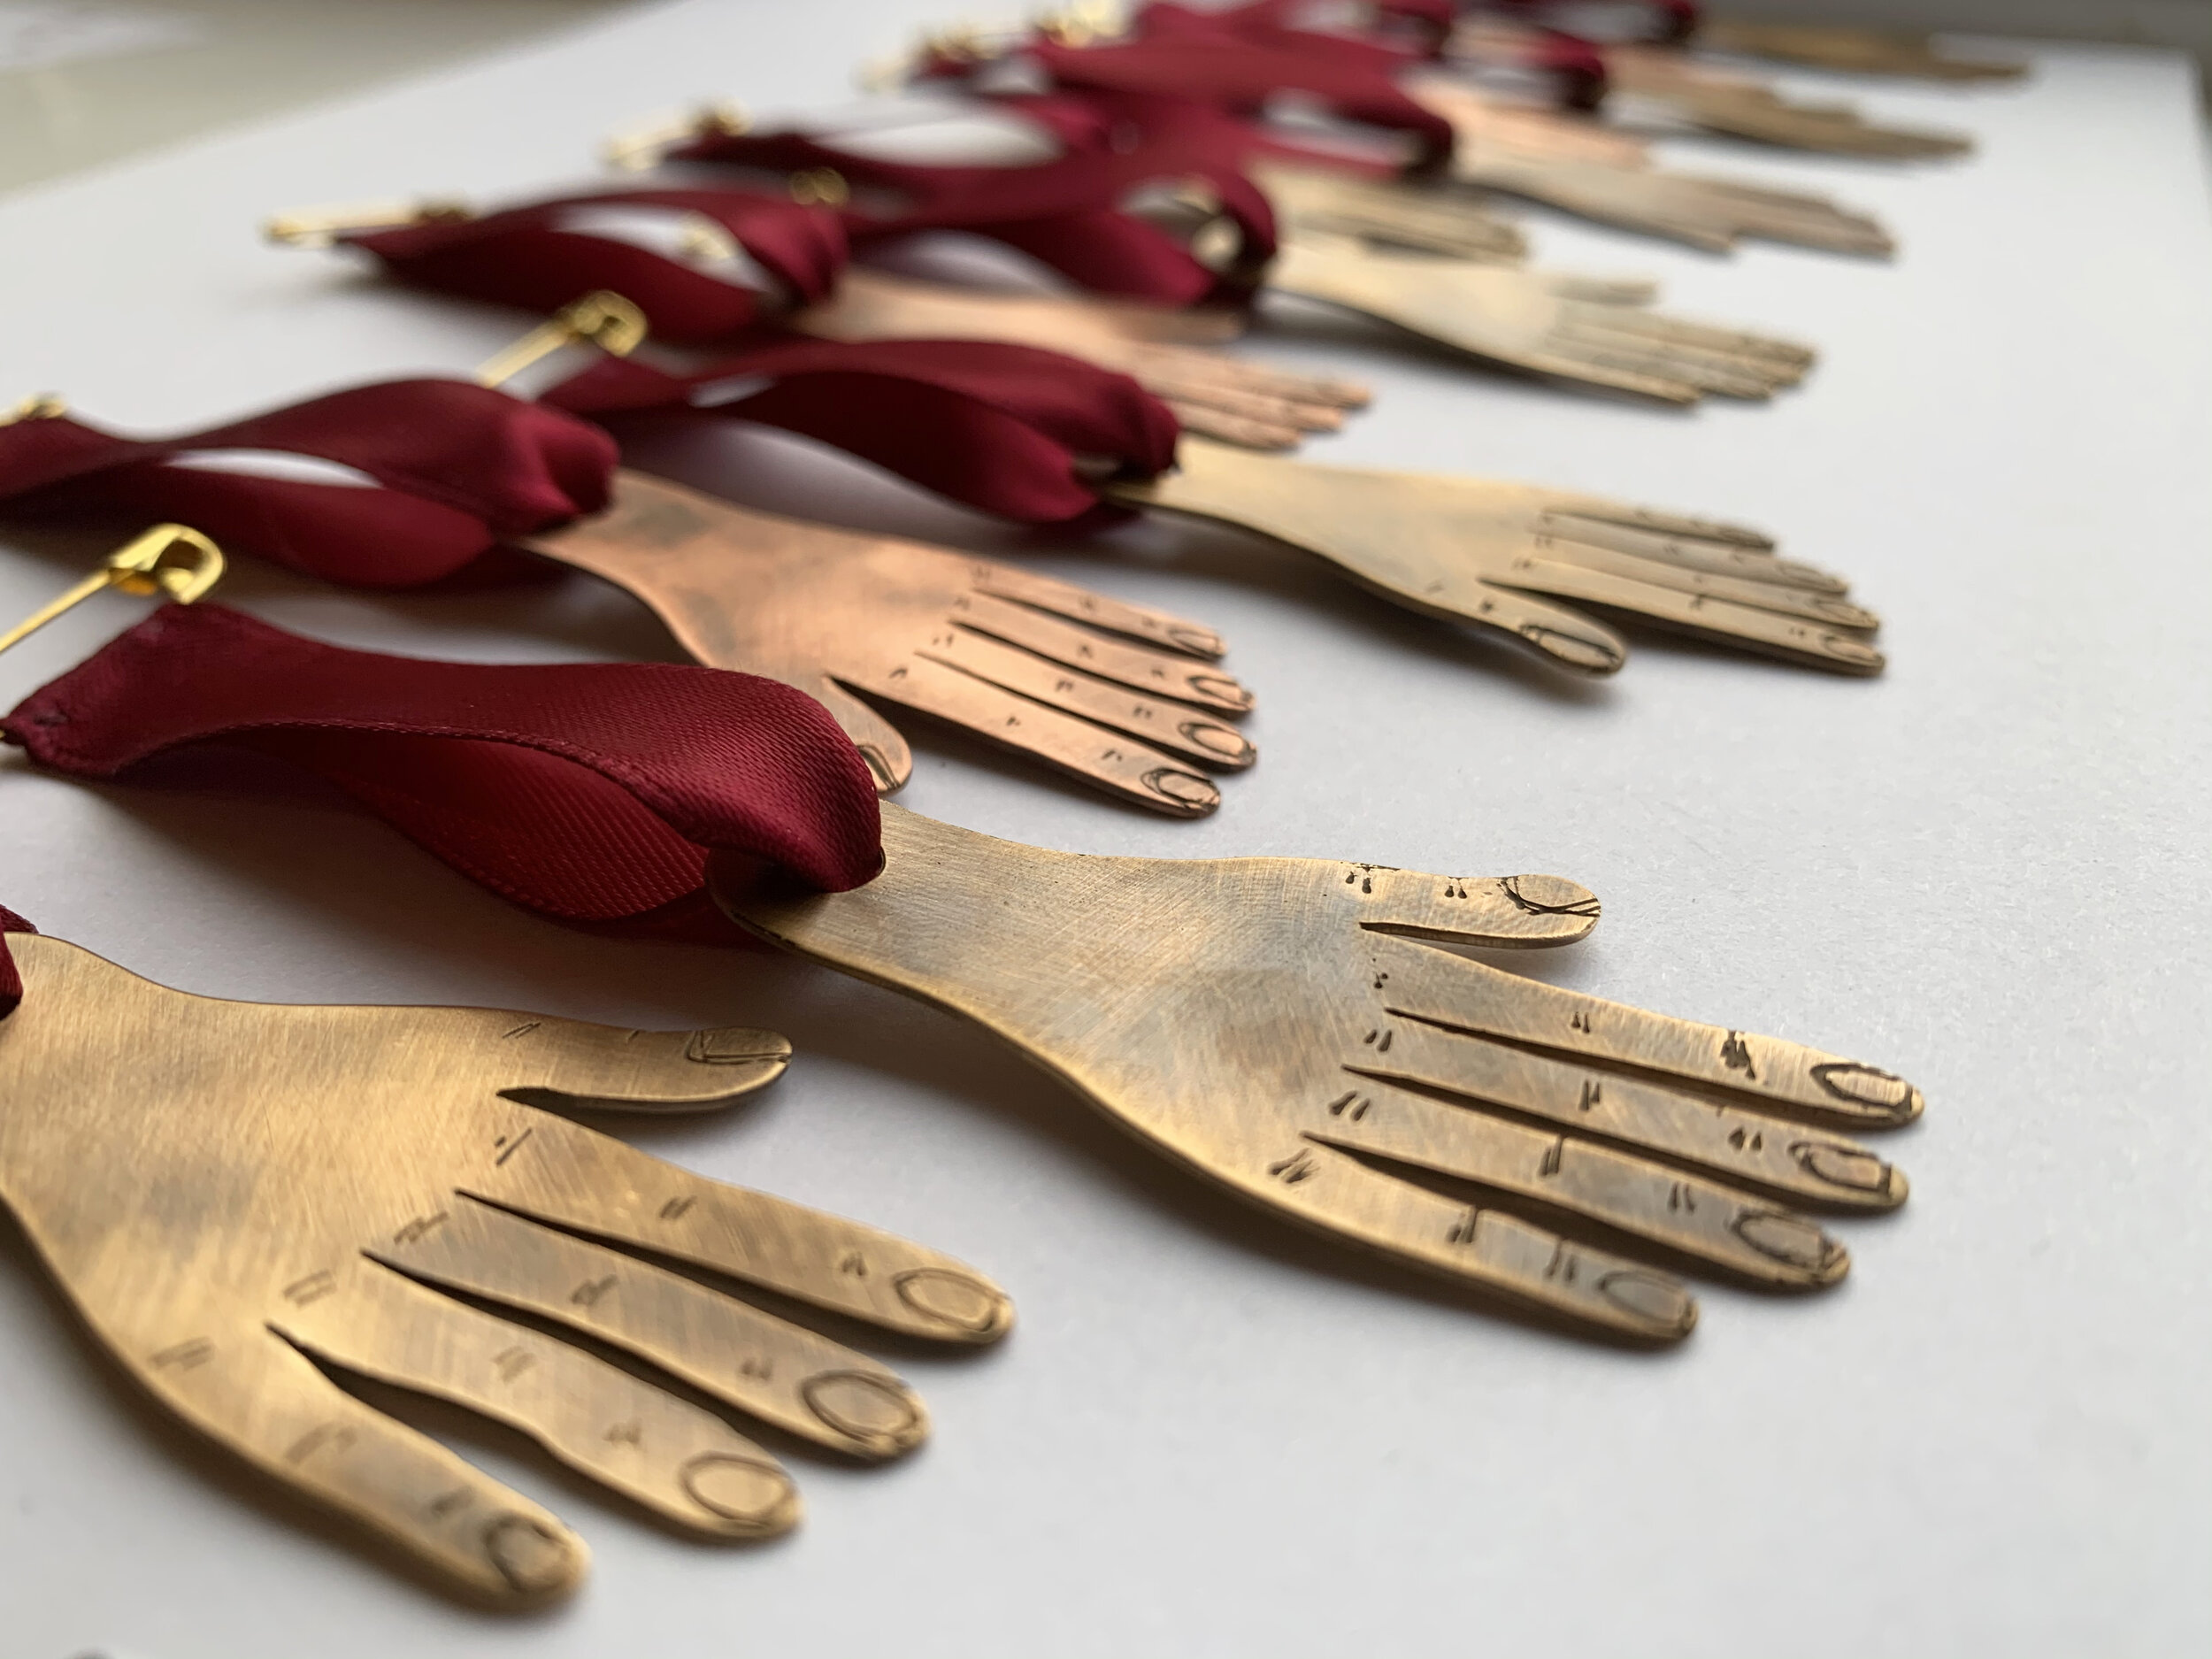 HAND MEDAL PROJECT